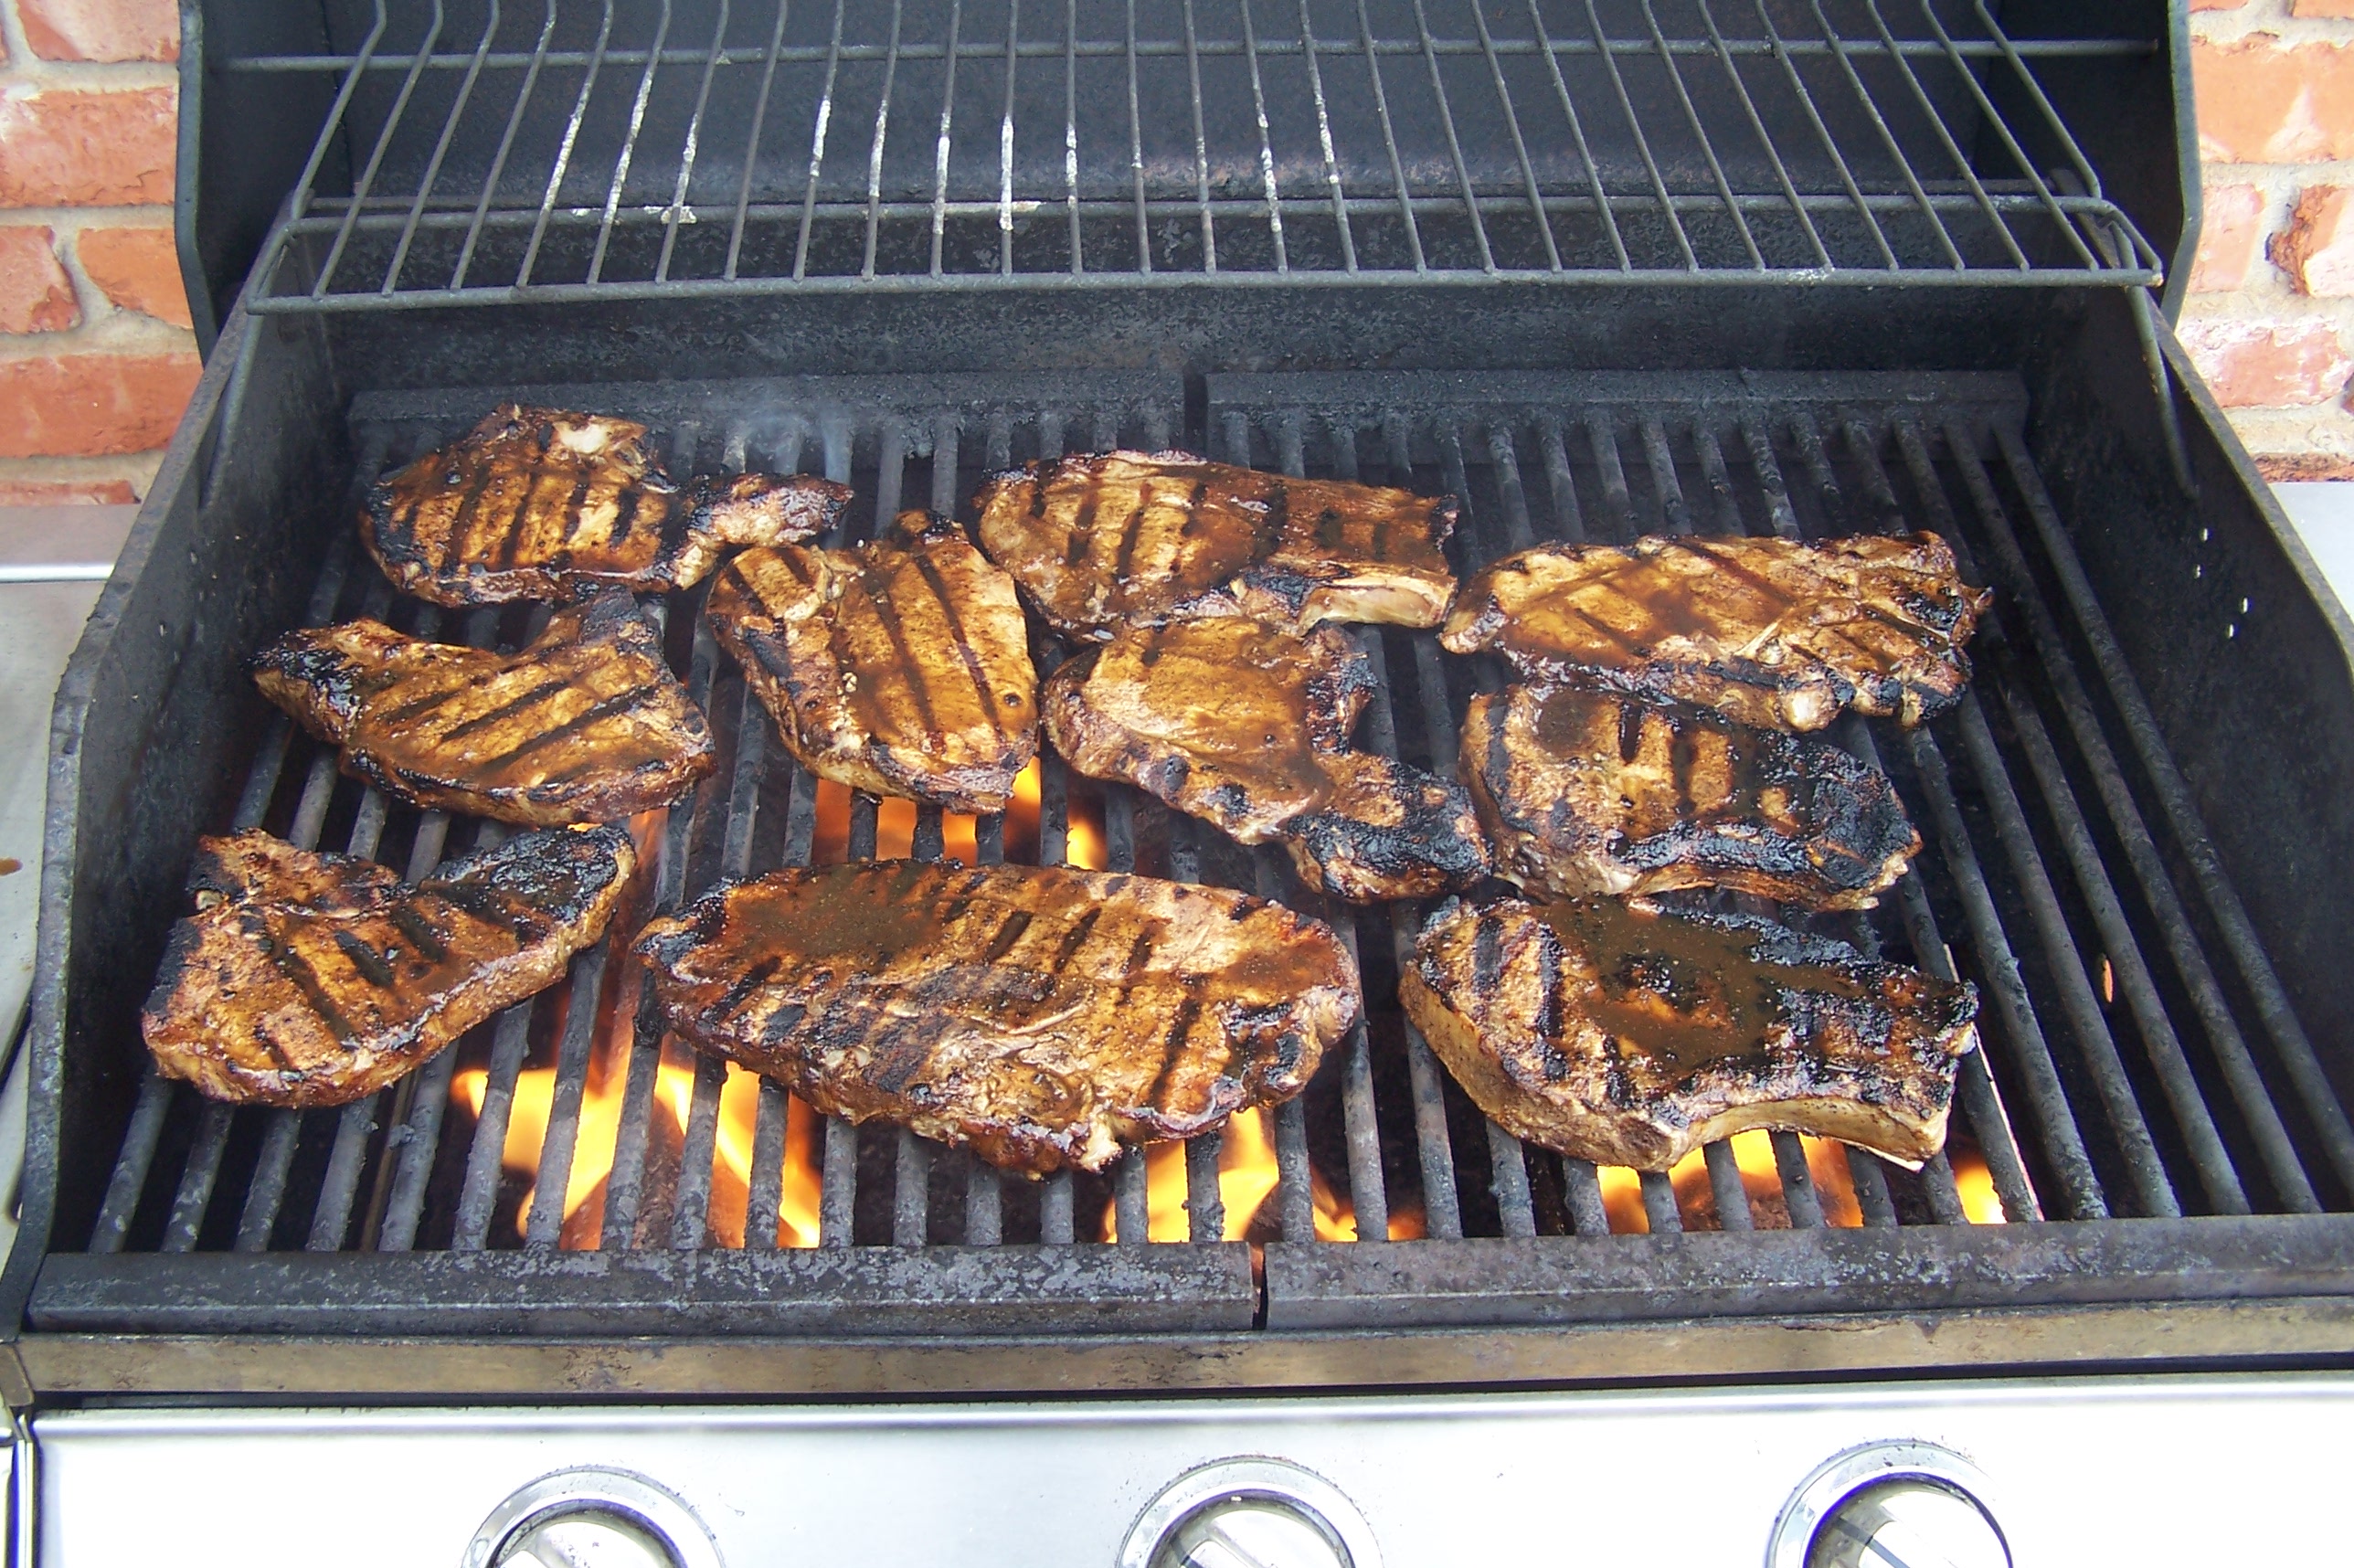 Spicy pork chops on grill 1 photo